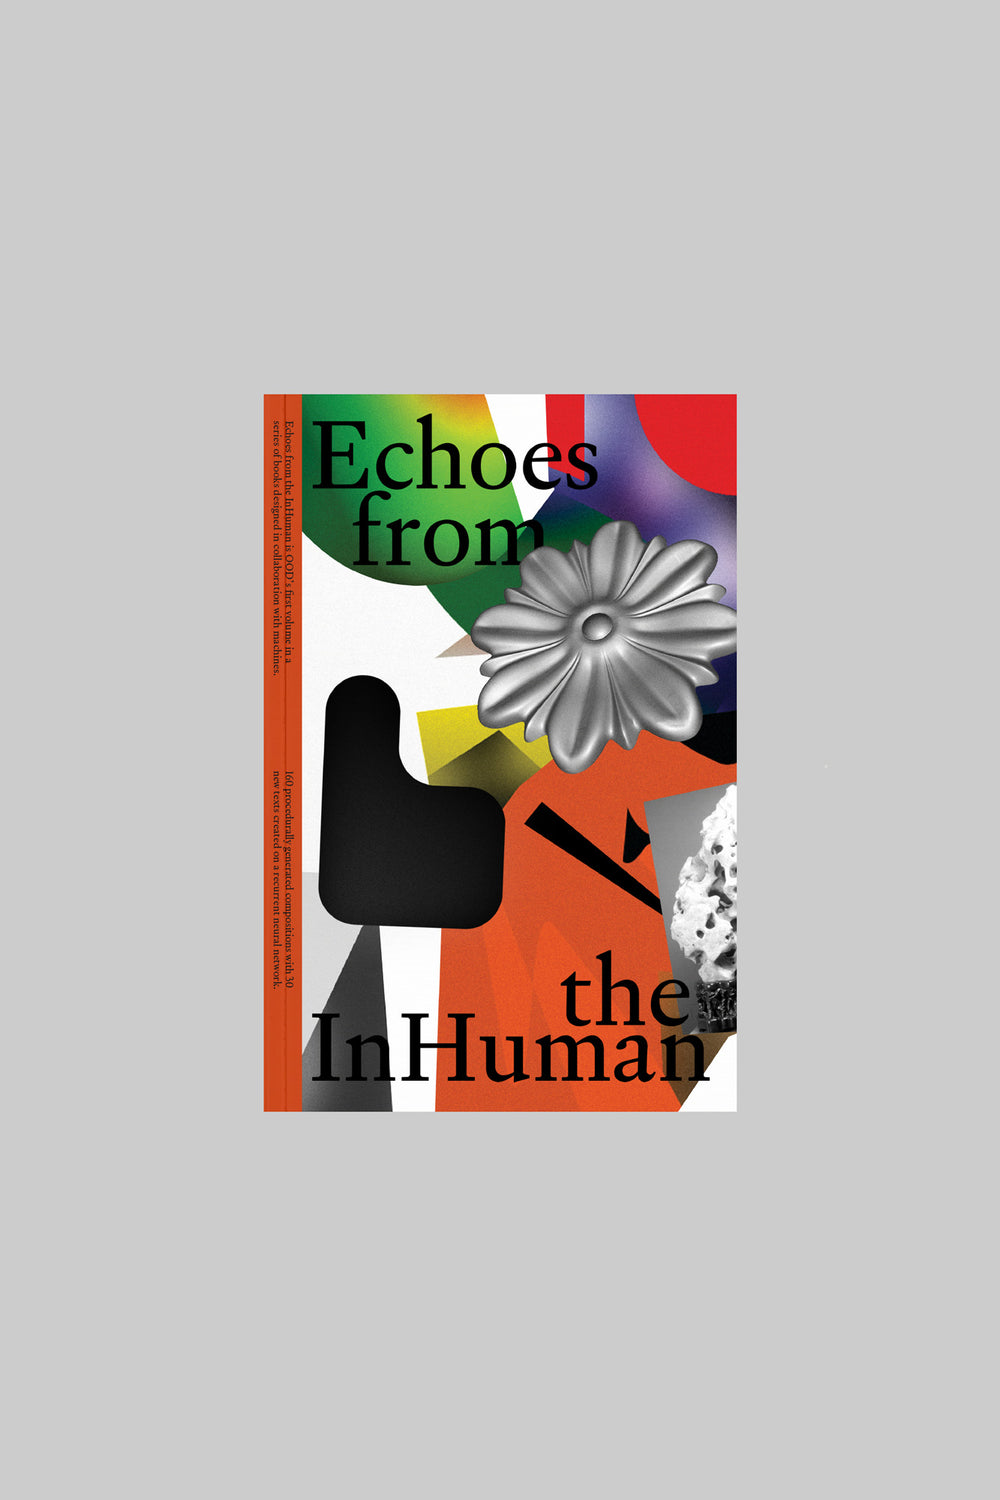 Echoes from the InHuman